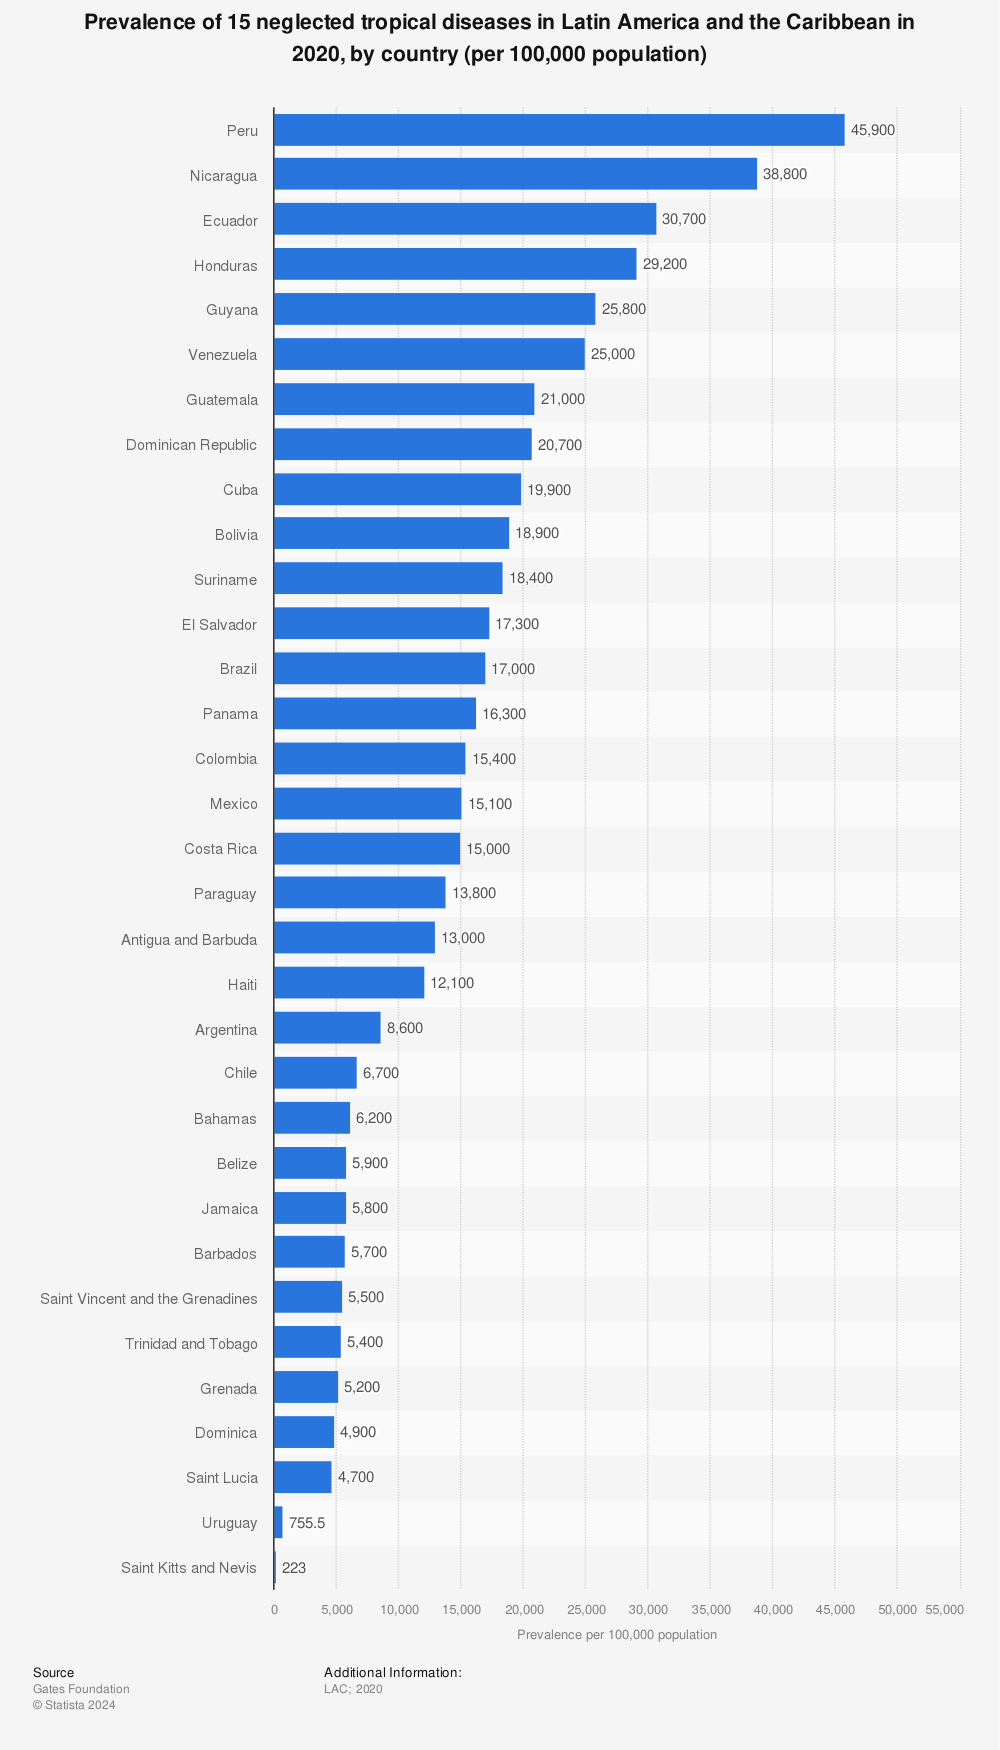 Statistic: Prevalence of 15 neglected tropical diseases in Latin America and the Caribbean in 2020, by country (per 100,000 population) | Statista